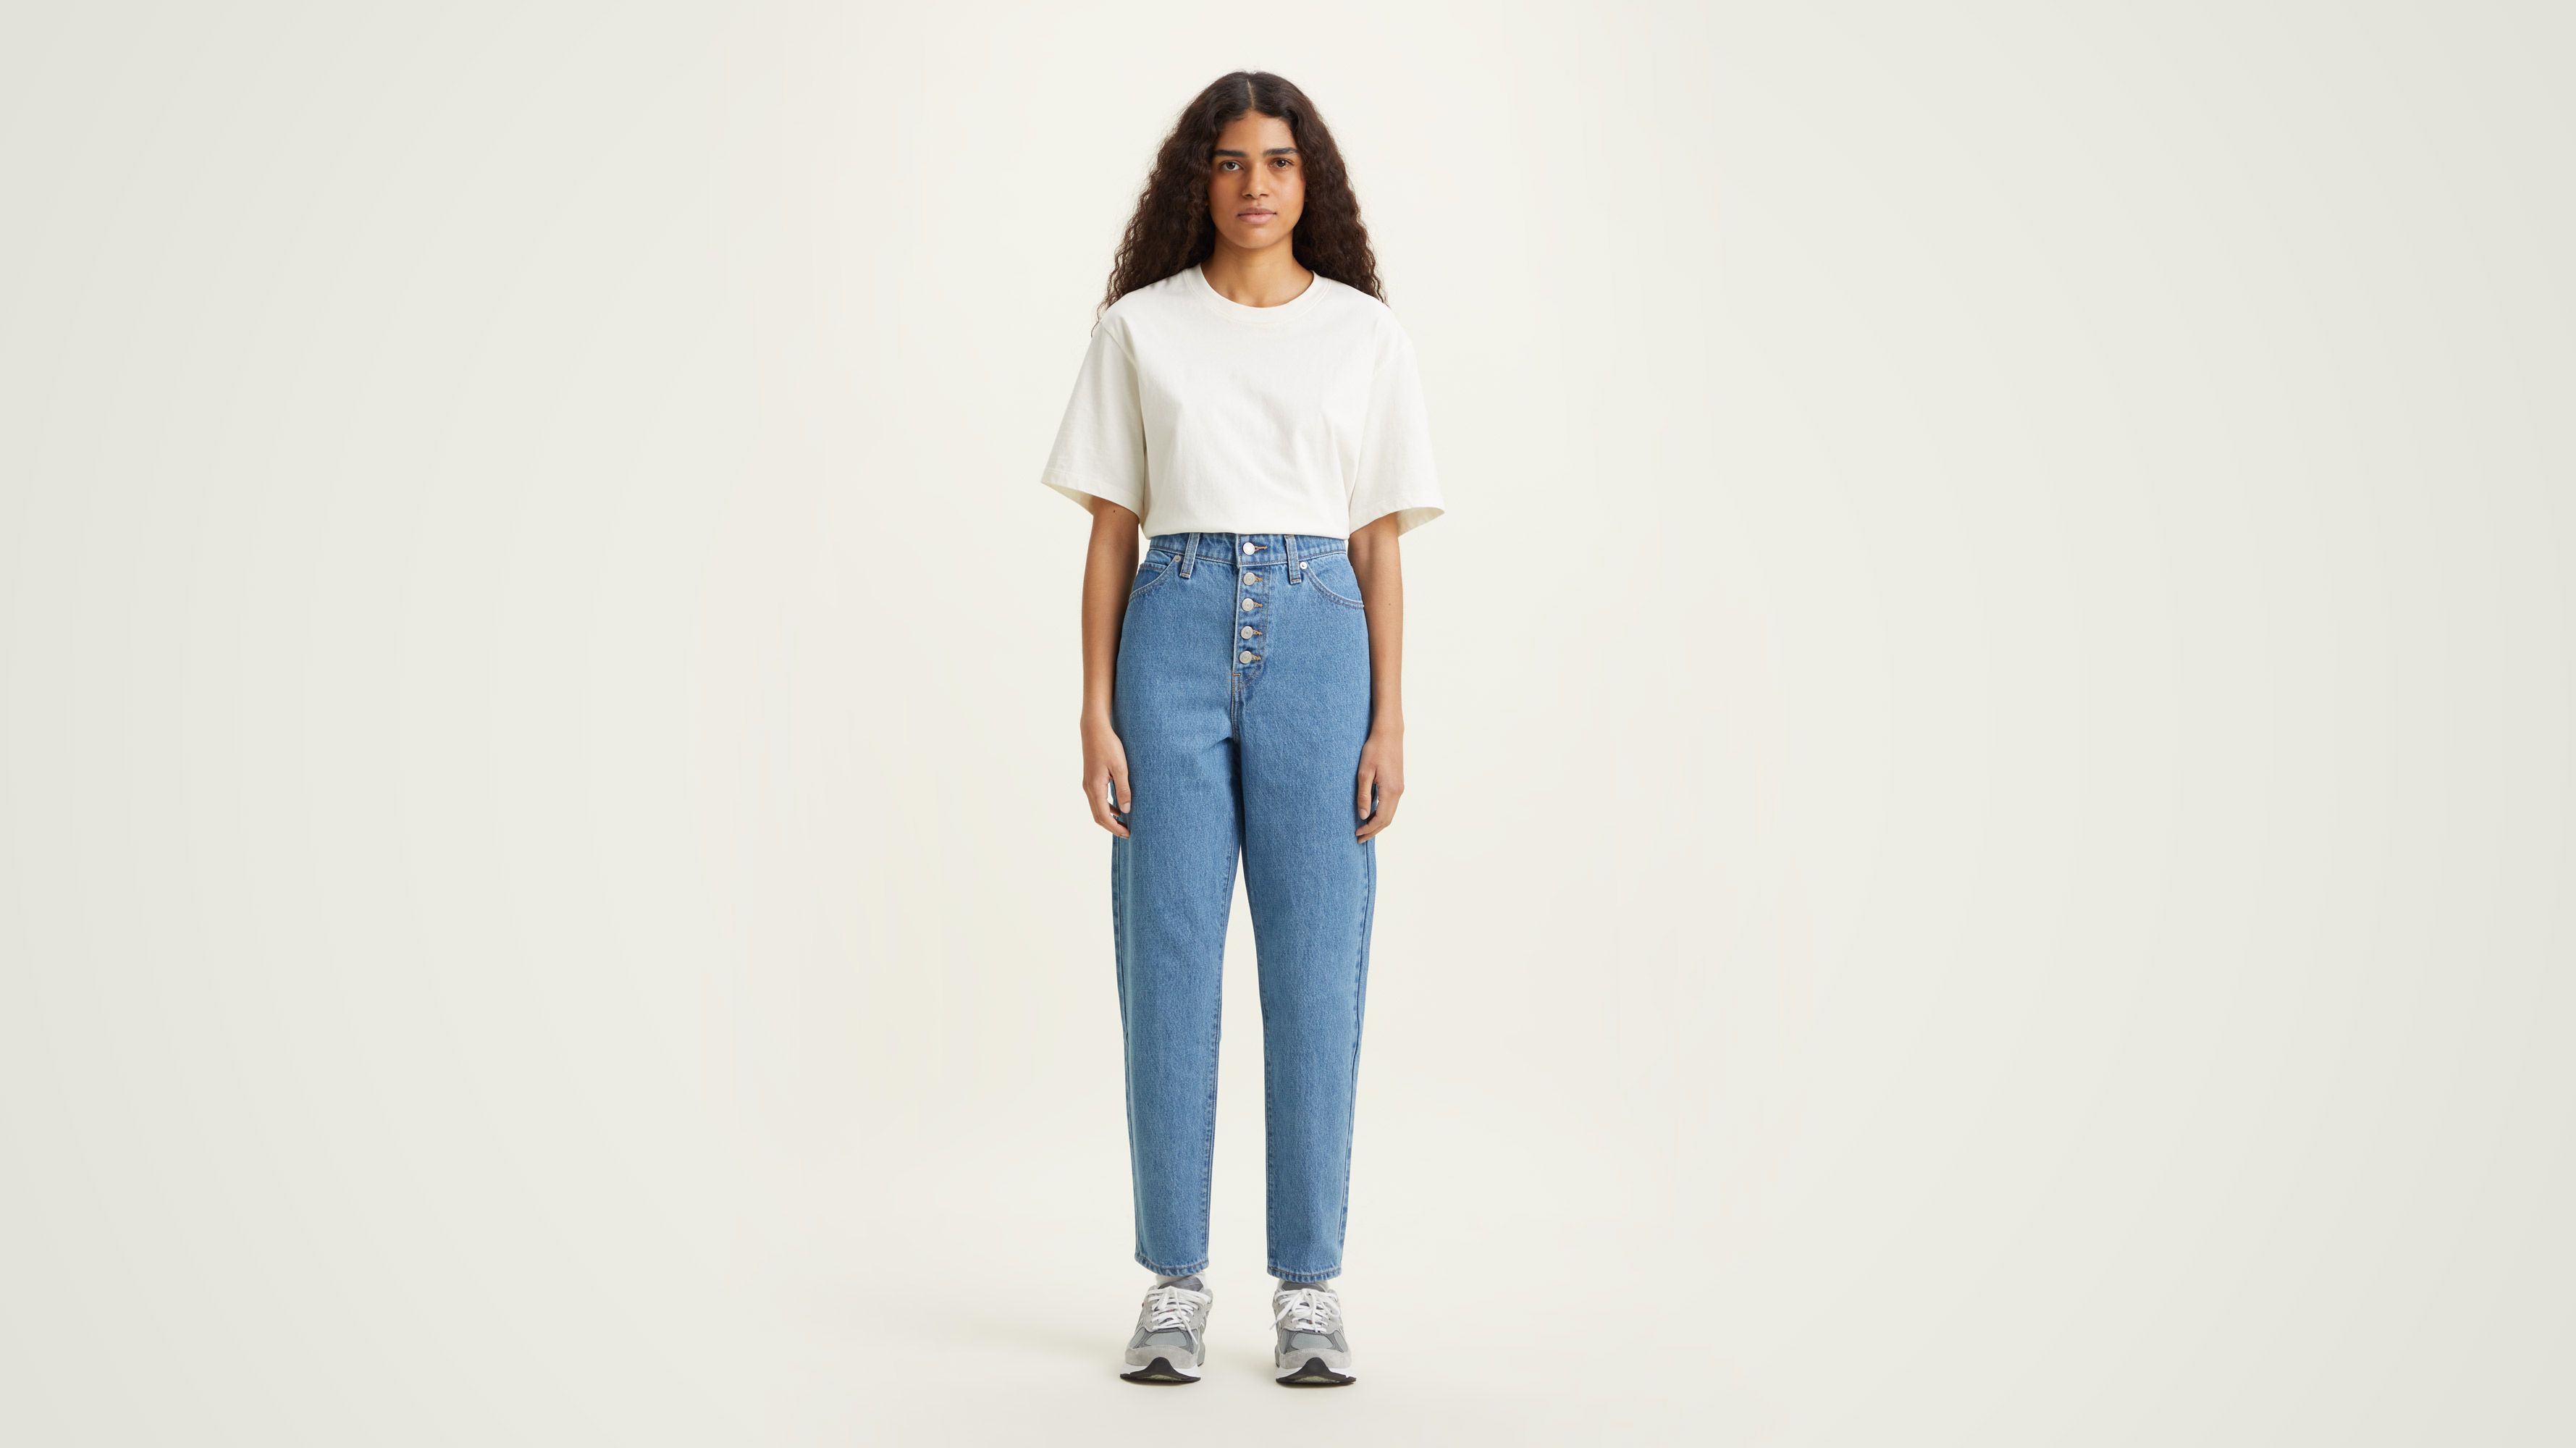 Levi's® NOTCH HIGH WAISTED MOM JEAN - Relaxed fit jeans - light